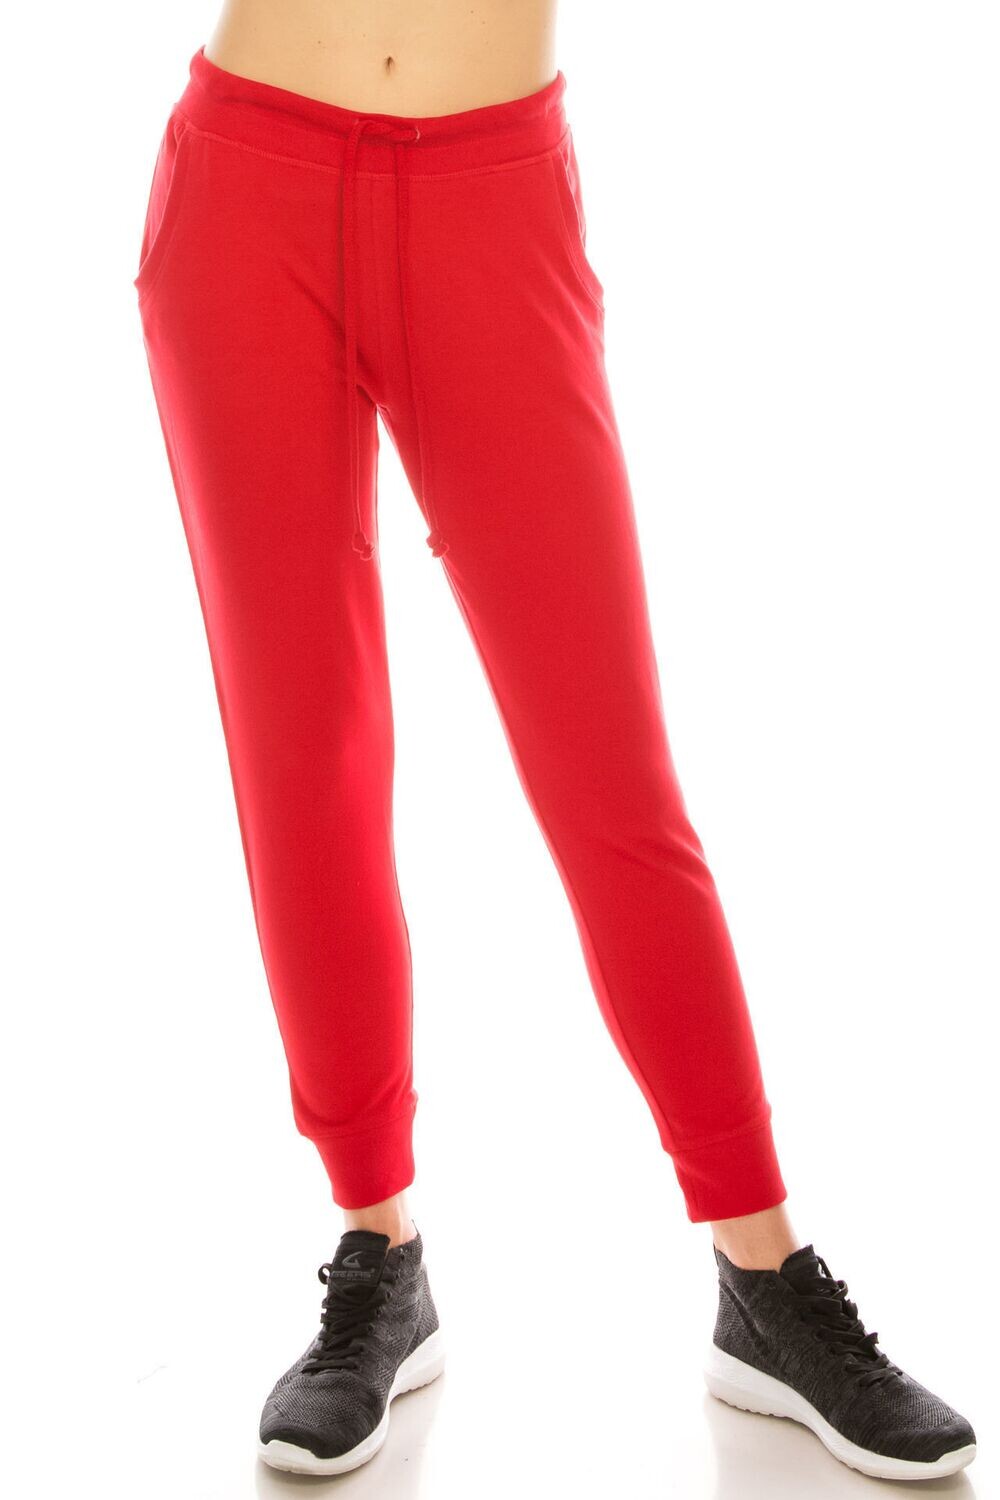 Women's Active Jogger Track Sweat Pants - Light Weight